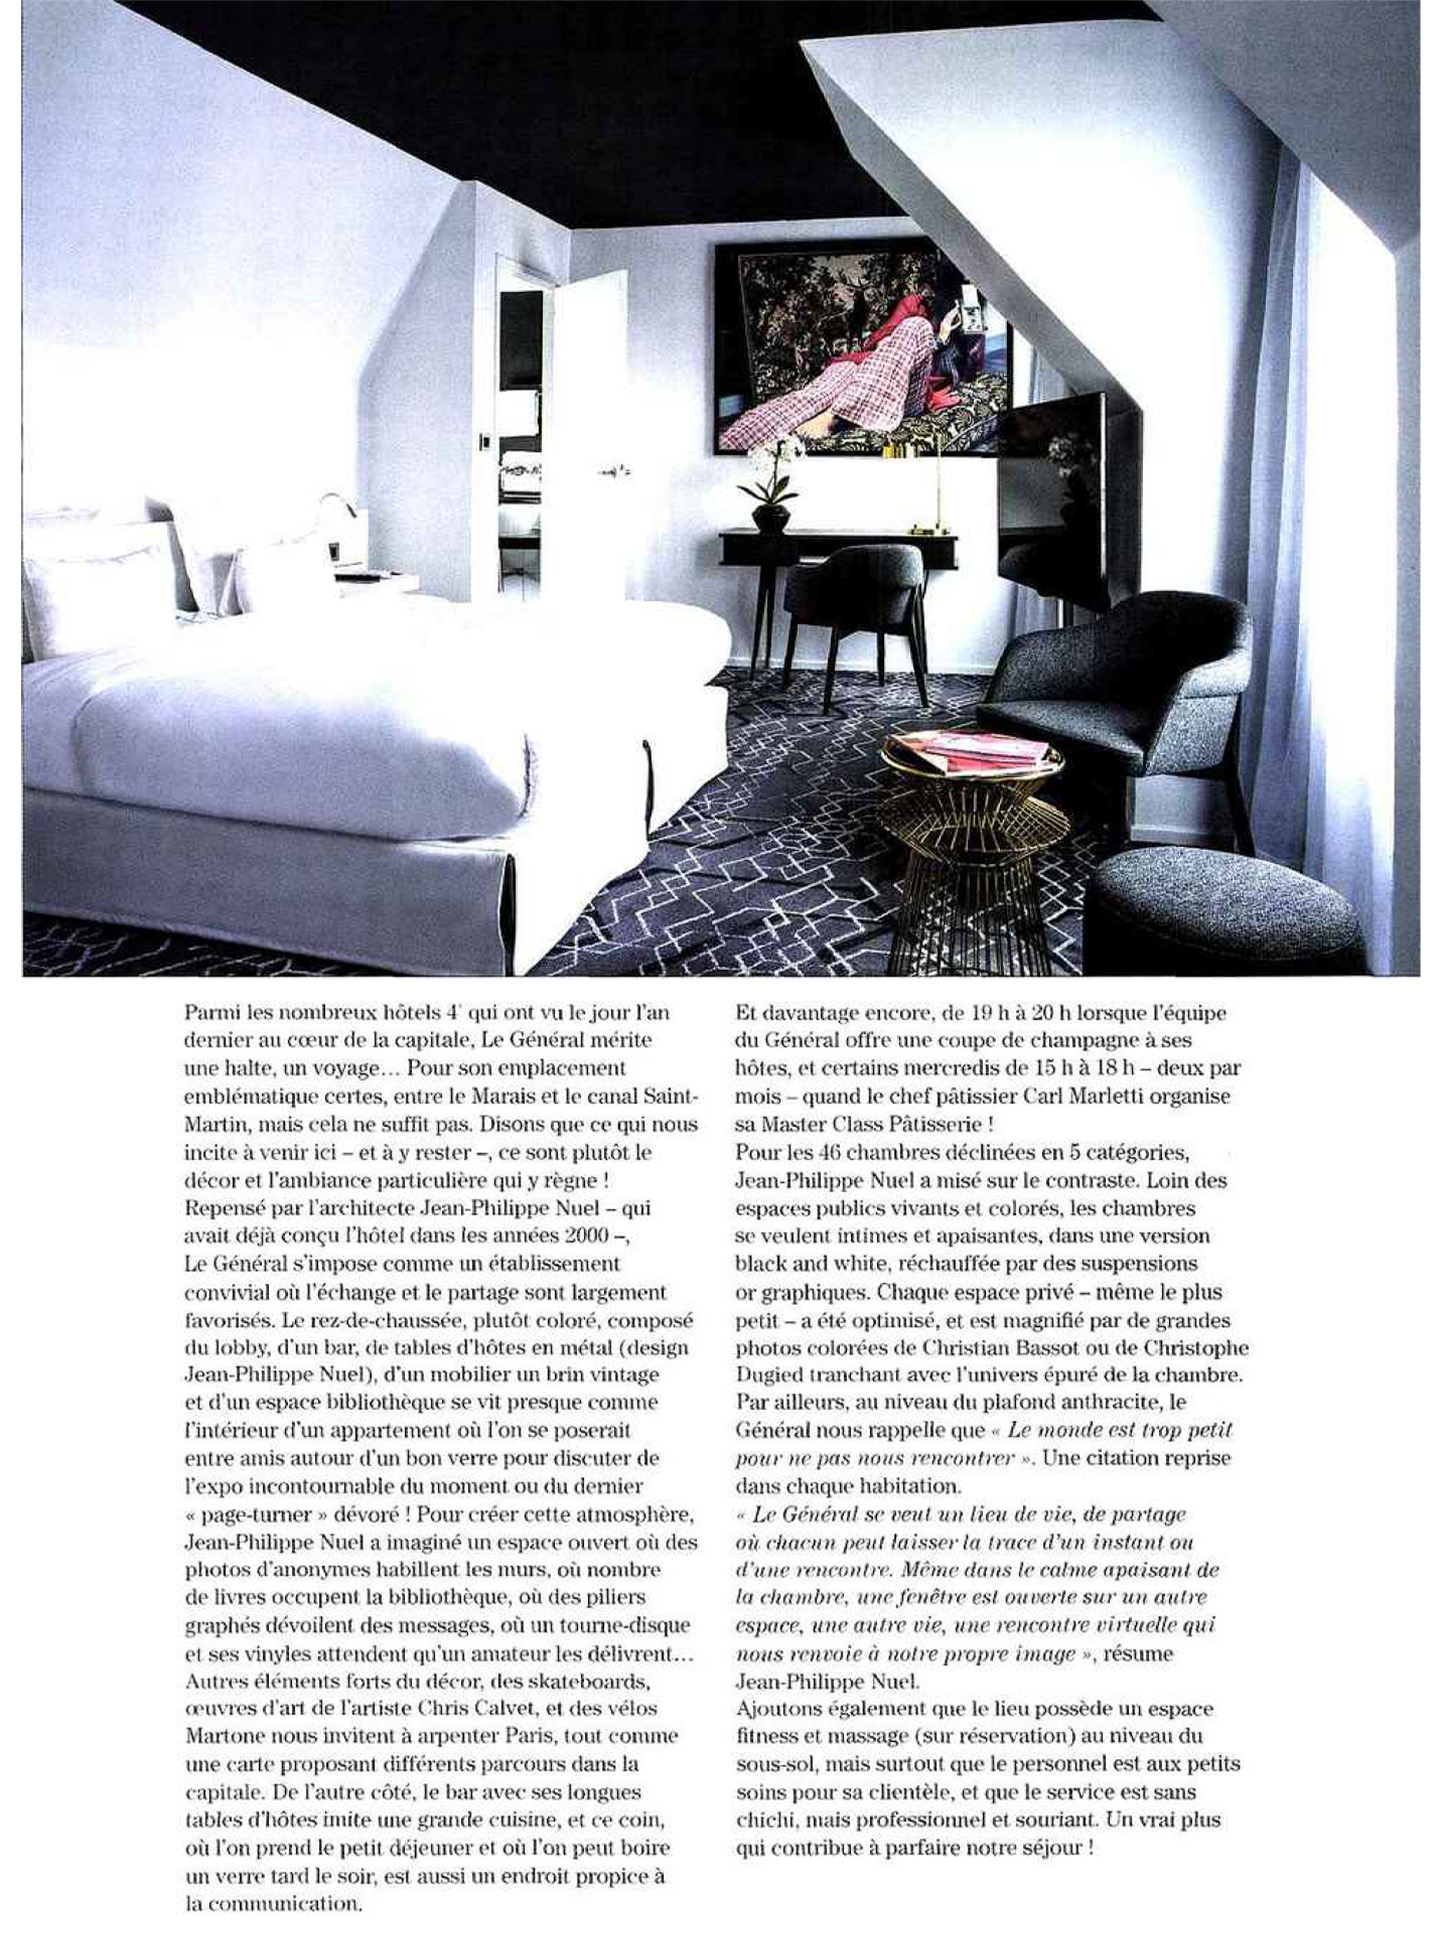 Article on the General Hotel created by the jean-Philippe Nuel studio in the Artravel magazine, new lifestyle hotel, luxury interior design, Paris center, French luxury hotel